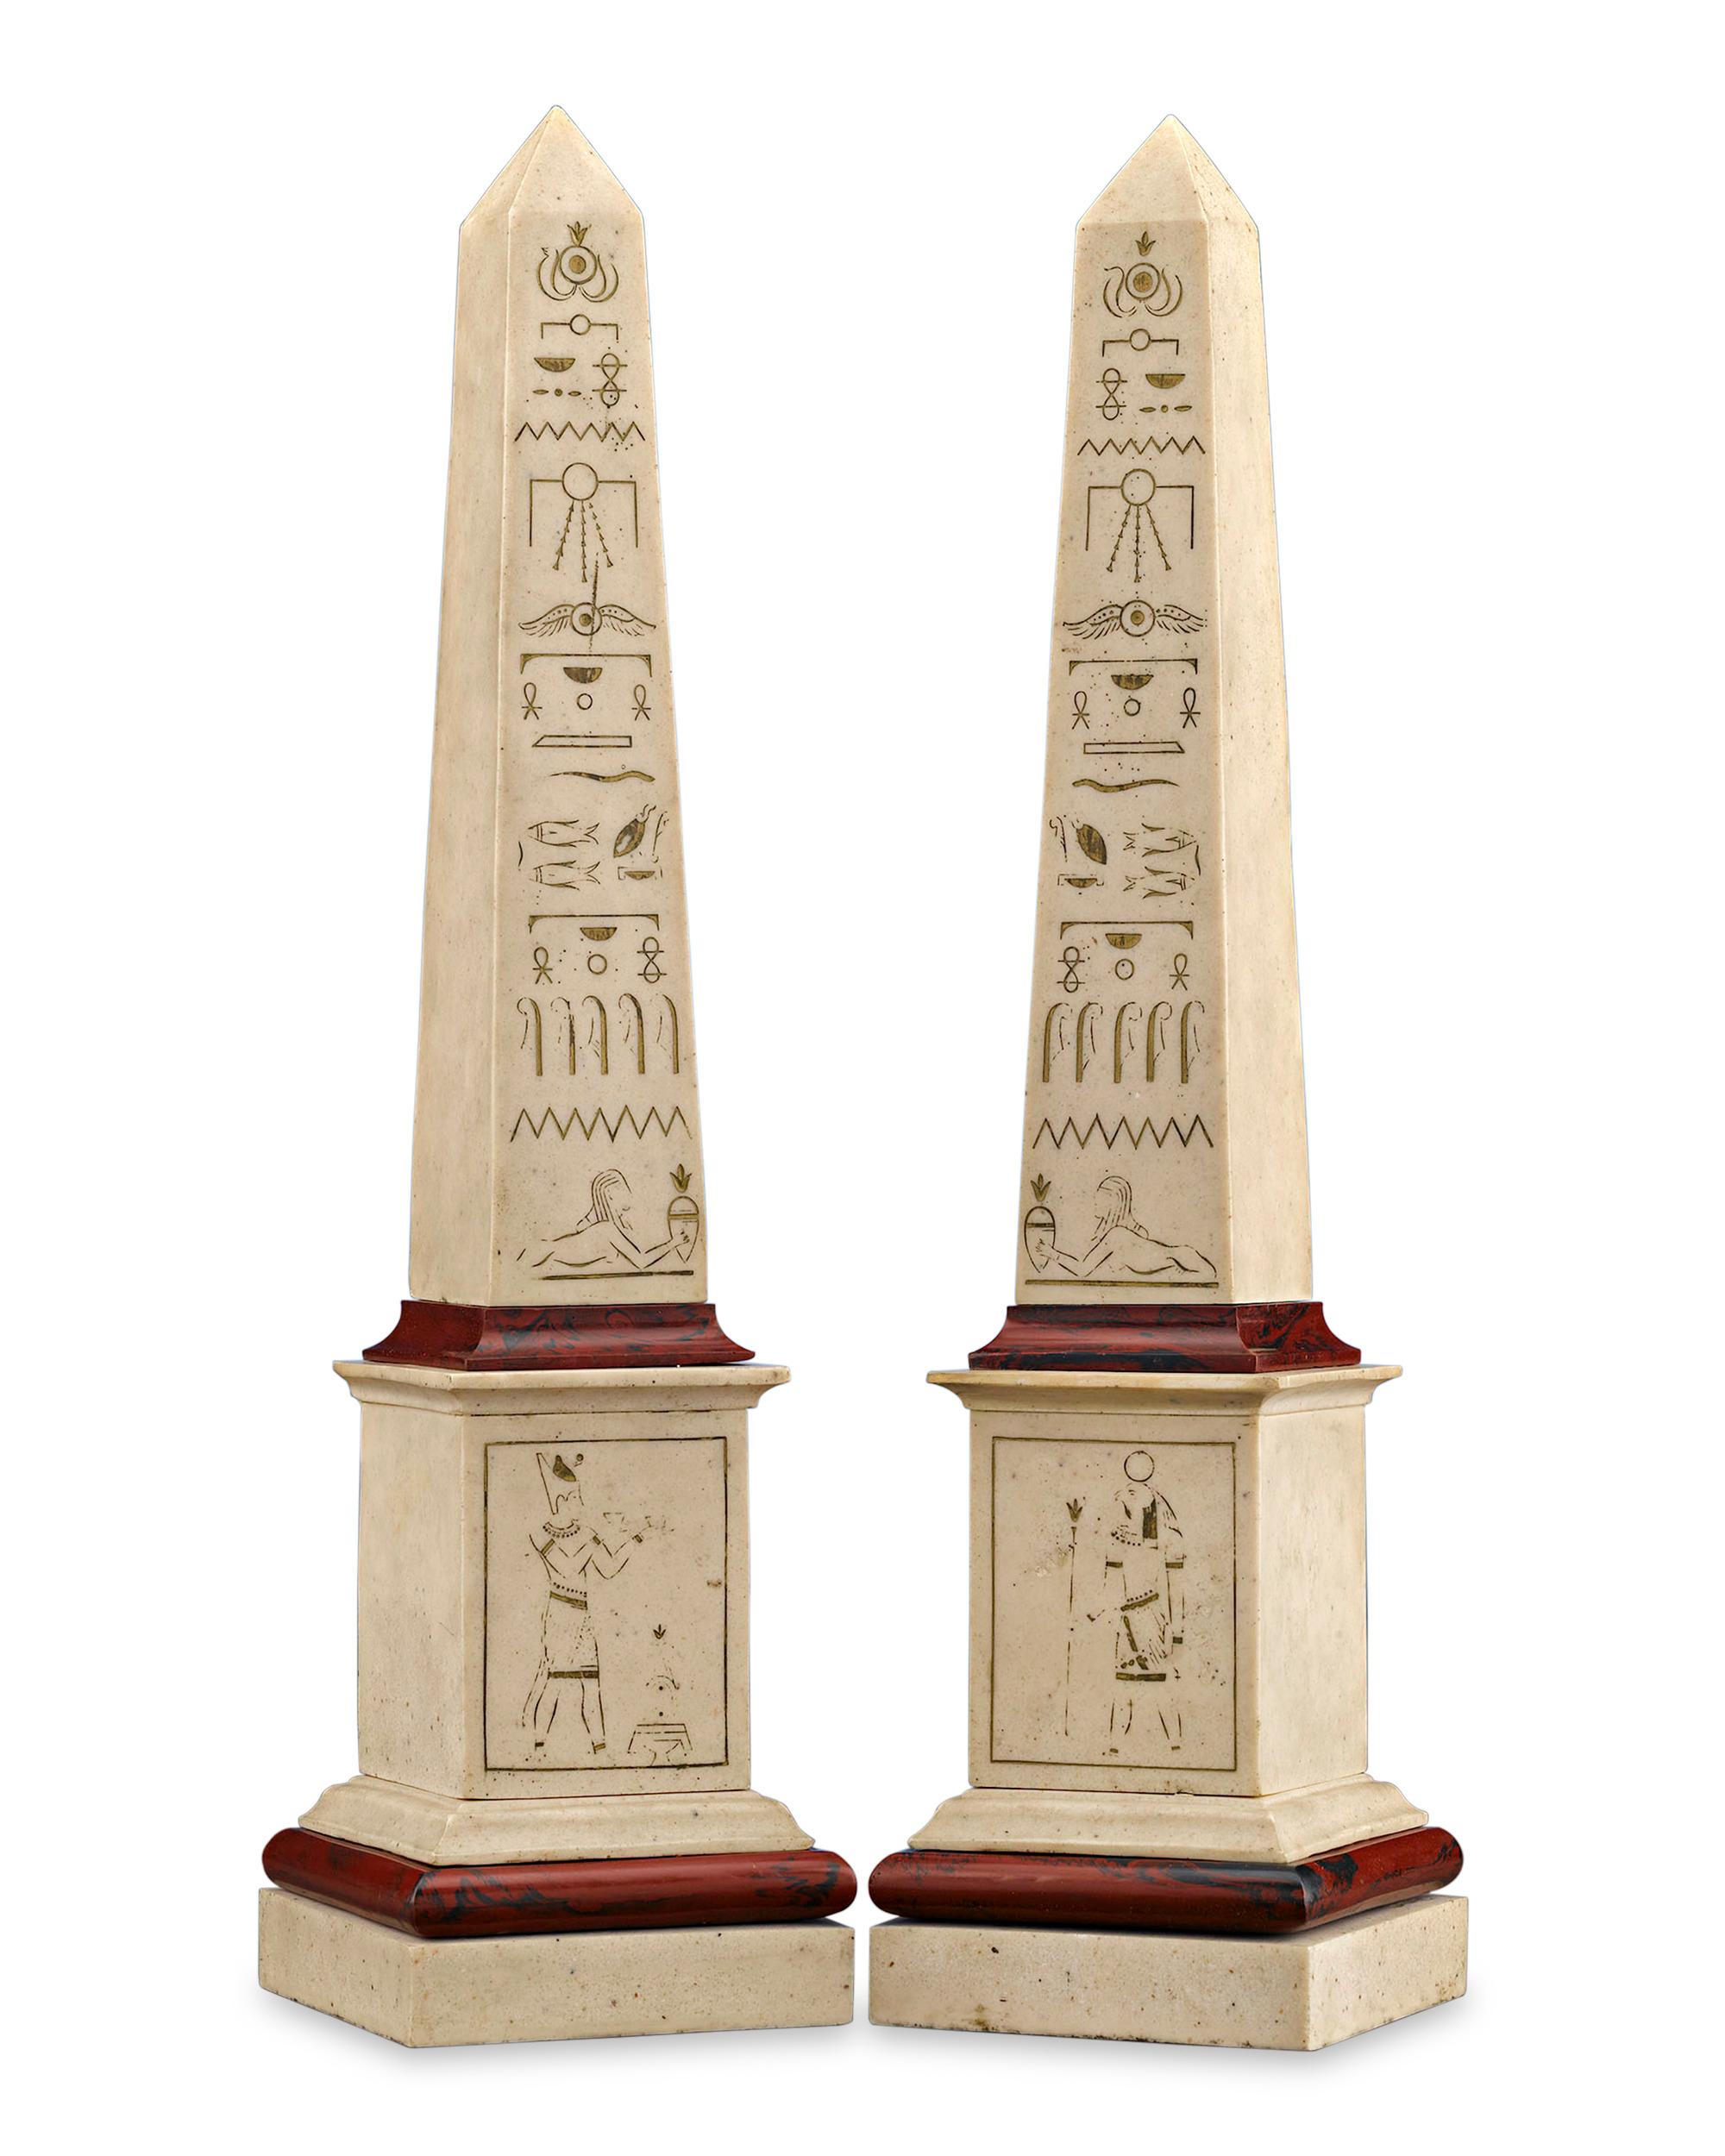 This extraordinary pair of Egyptian Revival obelisks are elegantly crafted of composition stone and faux marble. The rare 19th century models are adorned by intricately hand-carved hieroglyphics that extend upwards on their proportionate forms,